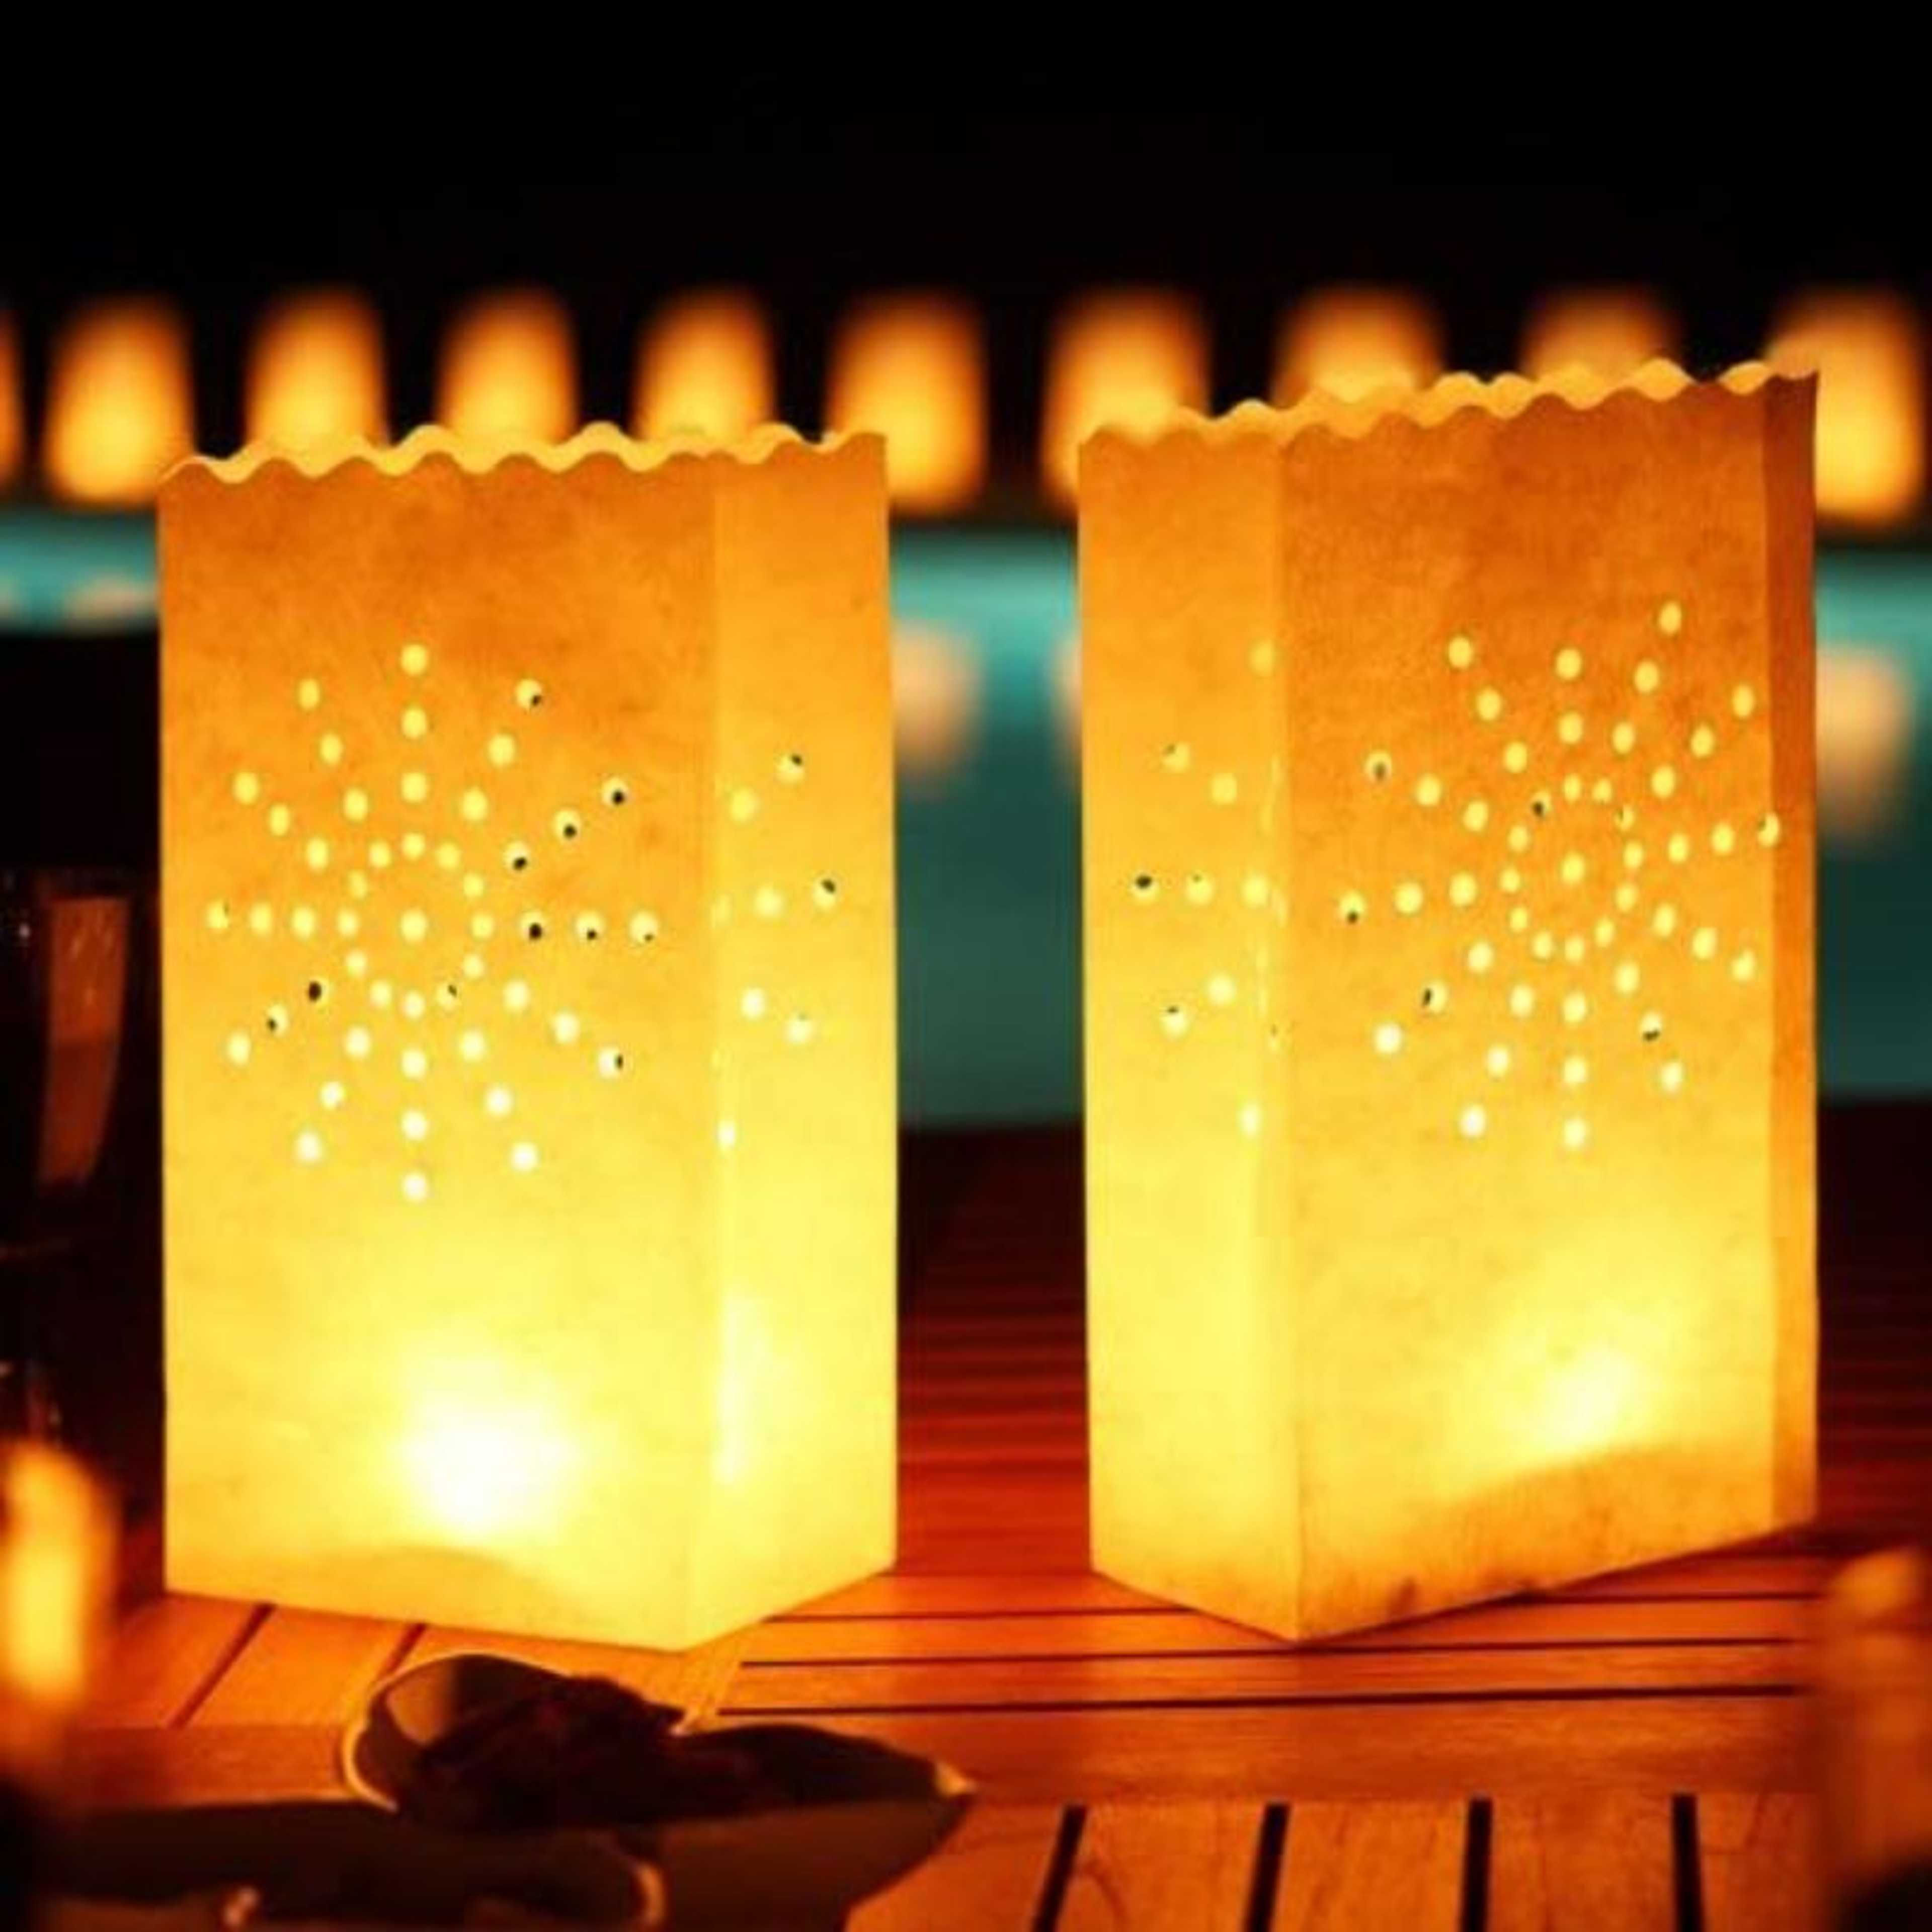 Pack of 5 - Assorted Design Luminary Candle Bags DIY Tea Light Candles Bags Decor for Wedding Birthday Valentine New Year Party